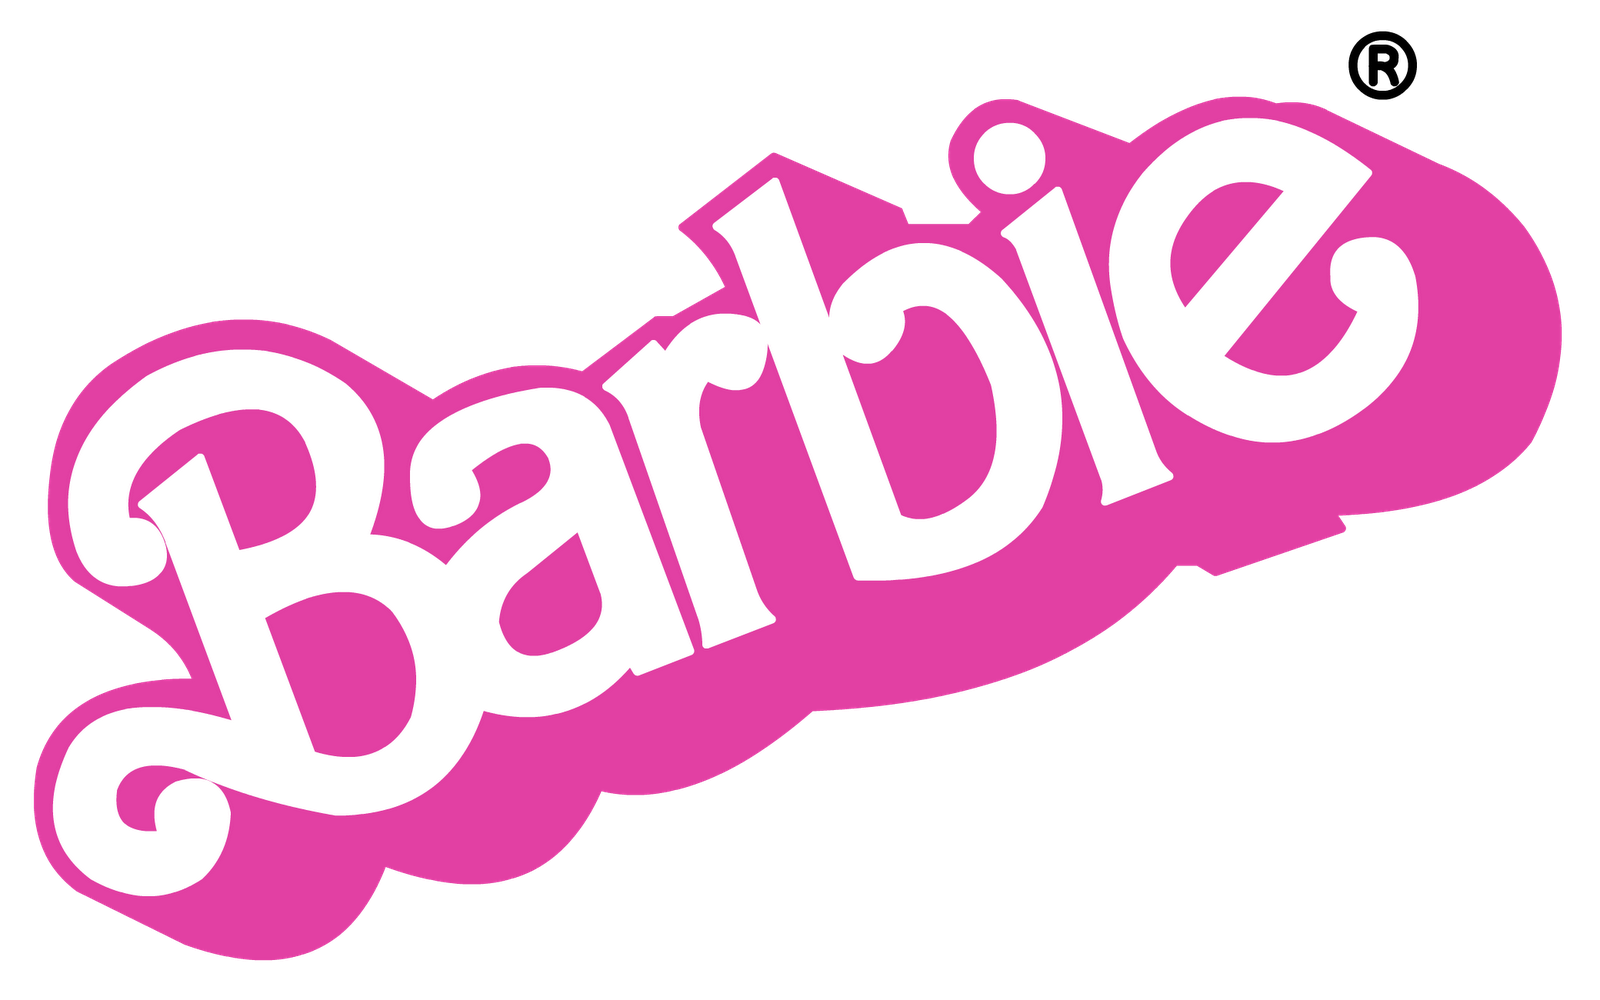 Download Barbie Logo Png Image For Free - Barbie, Transparent background PNG HD thumbnail